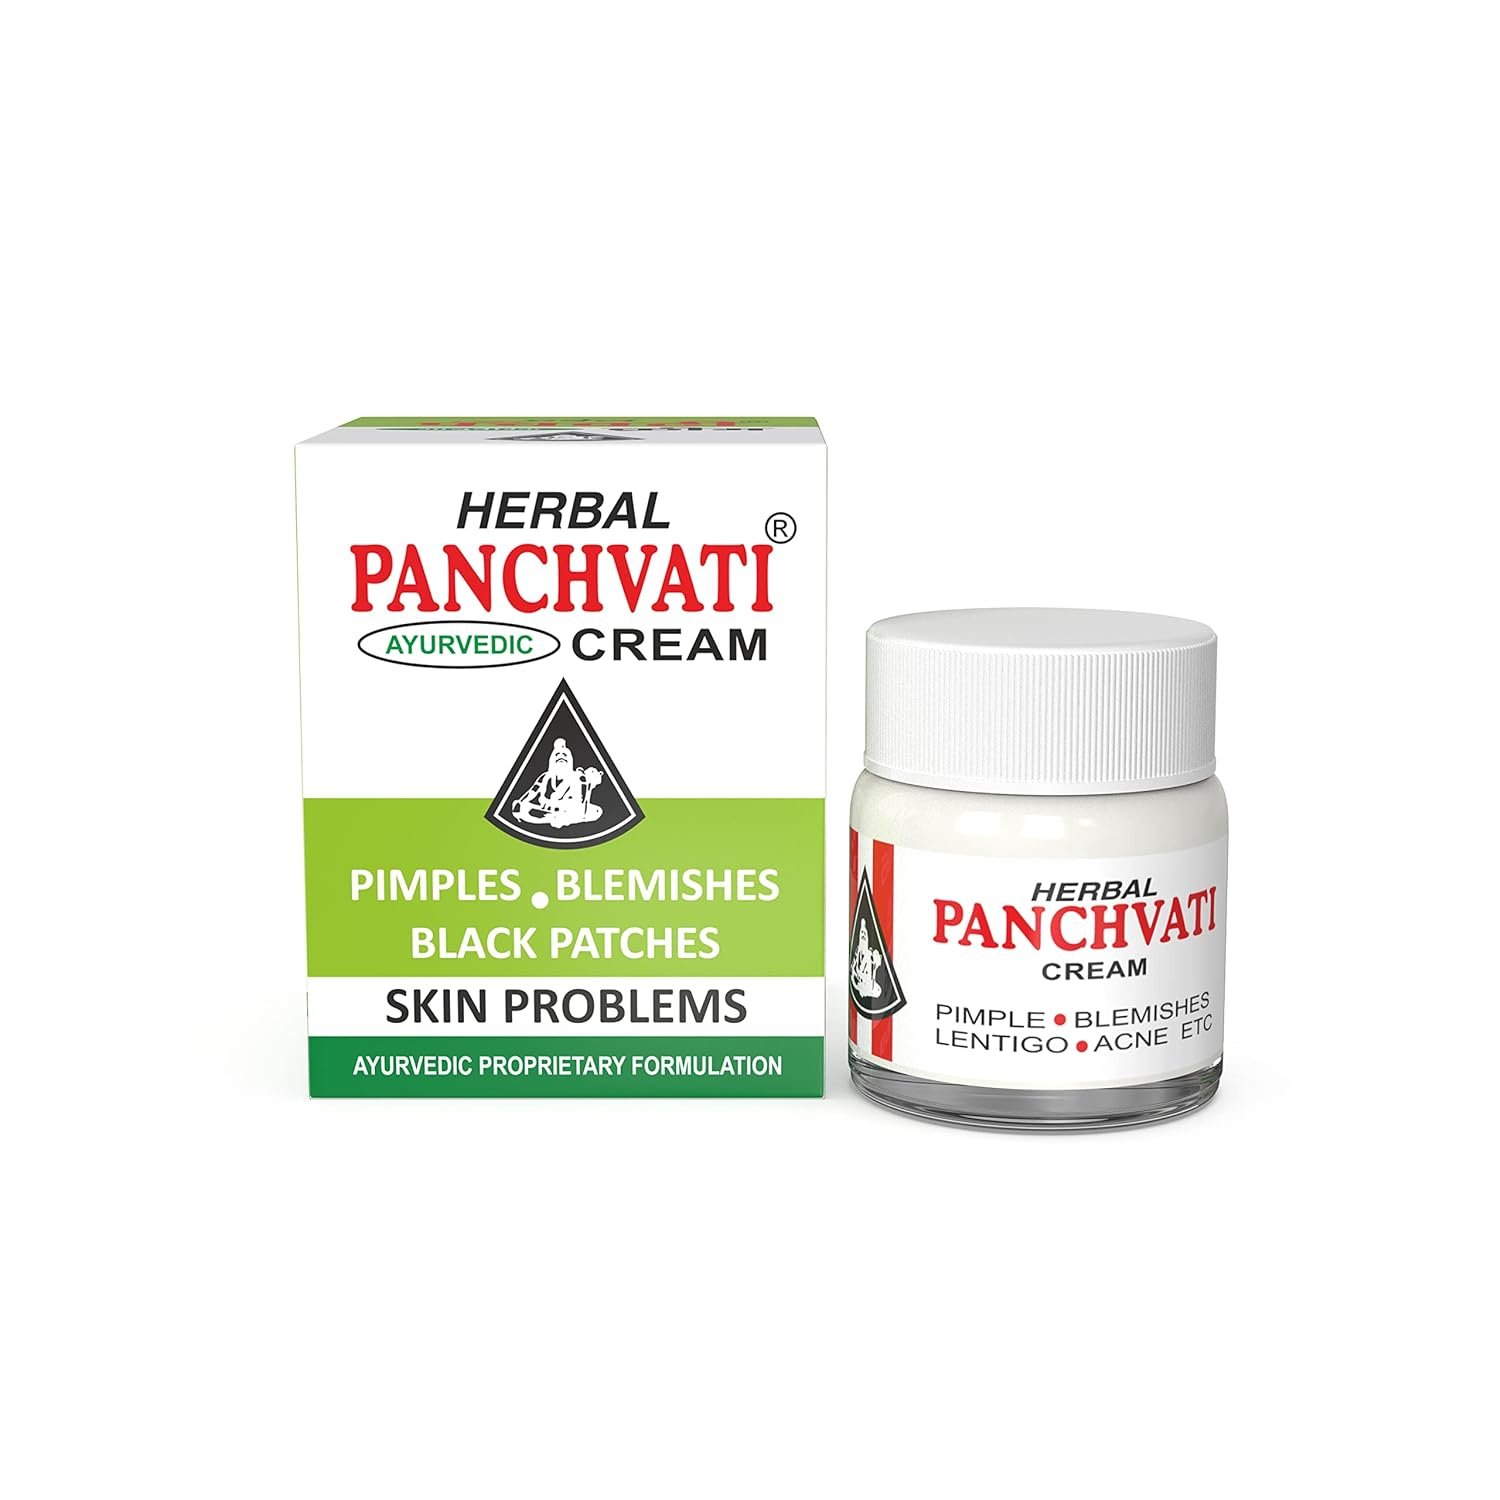 Panchvati Herbals Face Cream, Anti Blemish, Black Patches, Anti Acne, Pimple Removal Cream for Acne Scars, Pigmentation, Glowing Skin for Men & Women - 10g